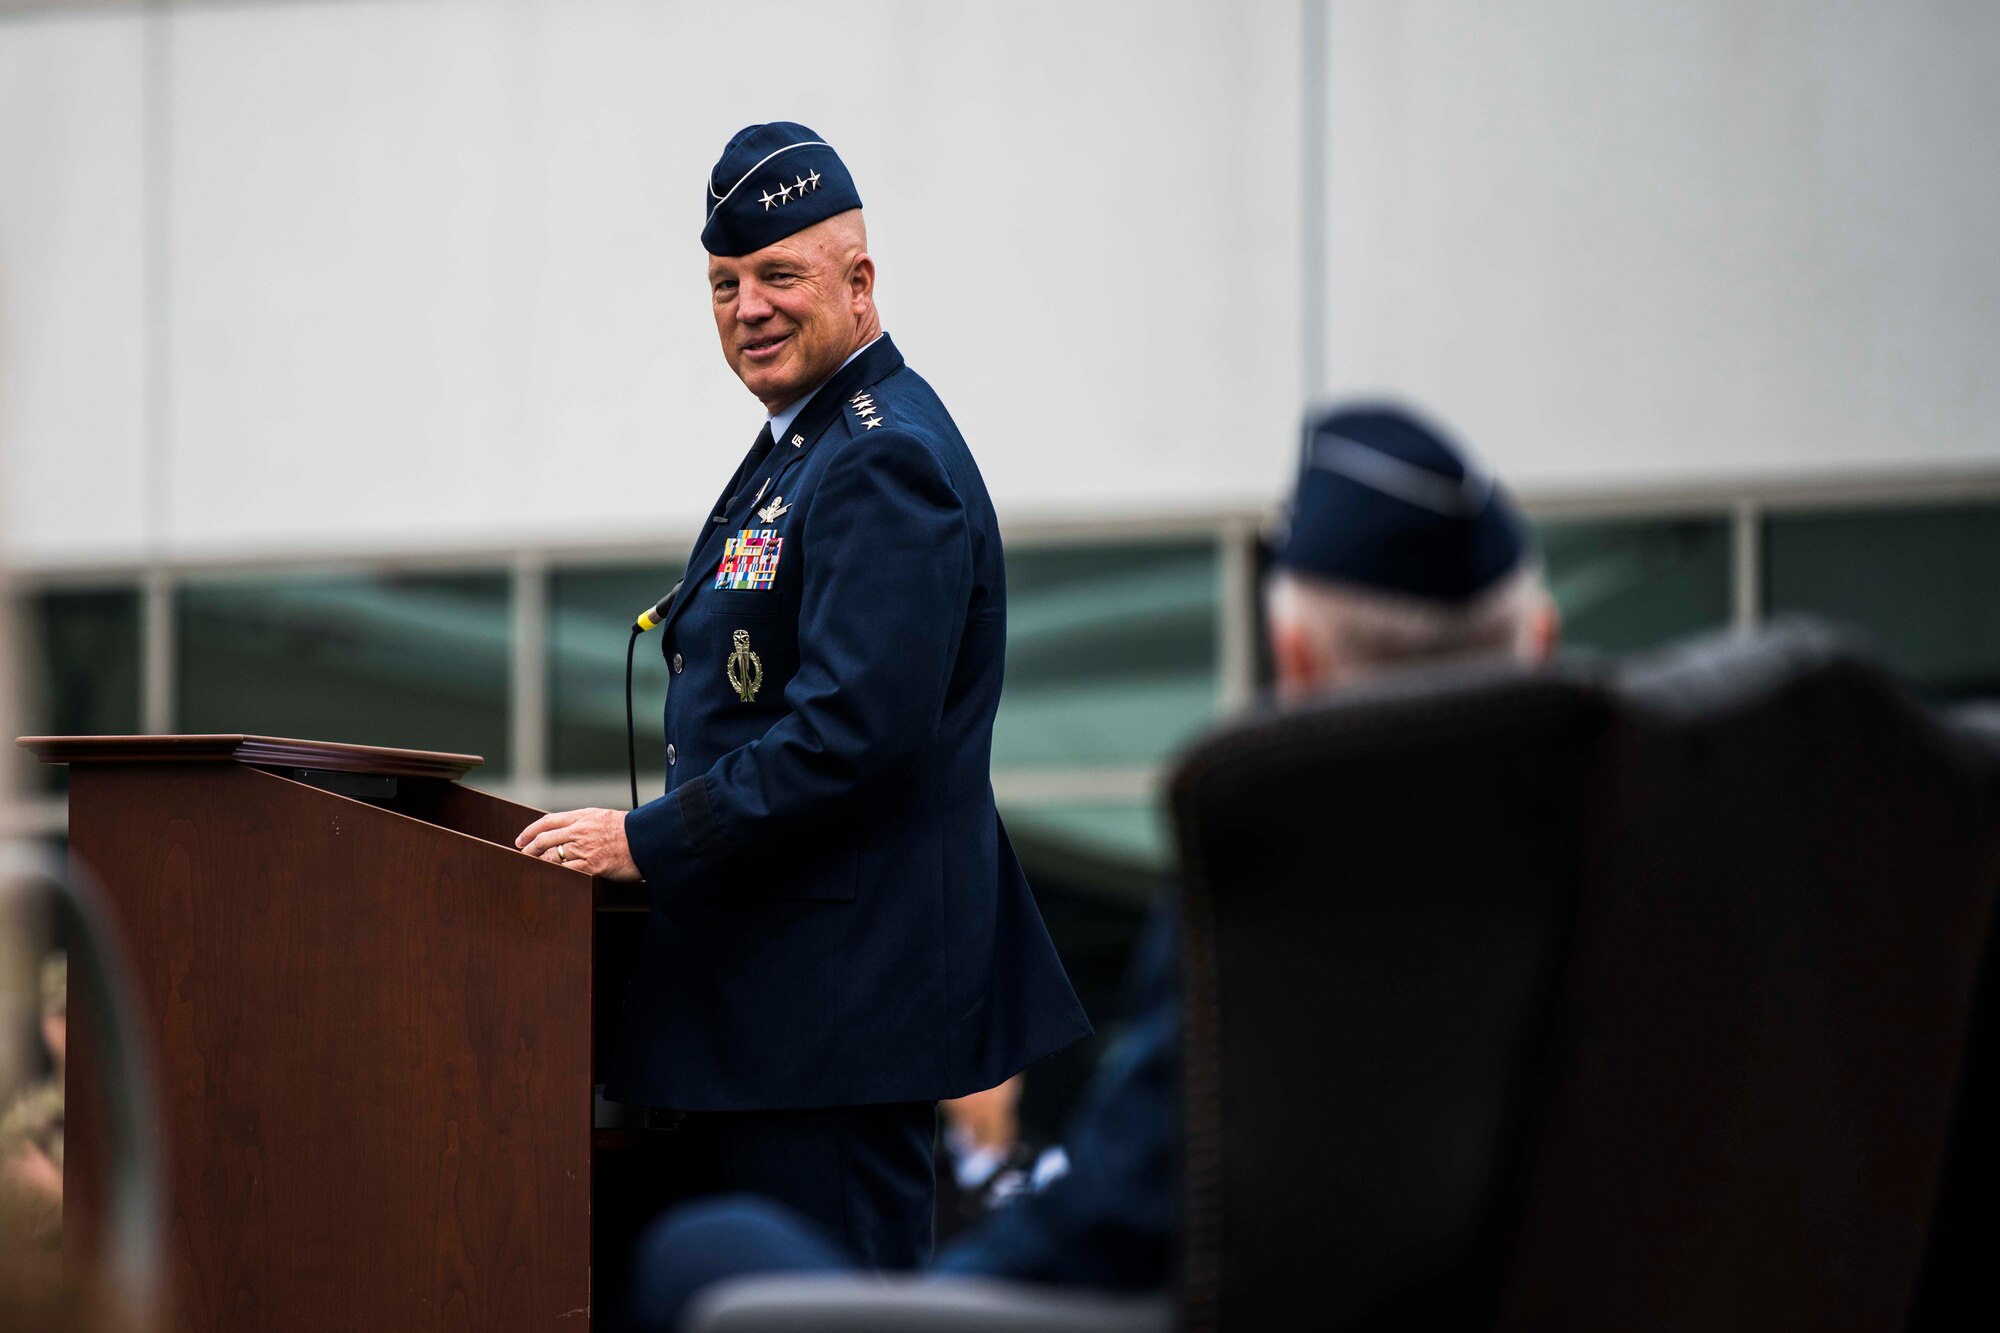 U.S. Space Force Gen. John W. “Jay” Raymond, Chief of Space Operations, looks back at U.S. Air Force Lt. Gen. John F. Thompson, Space and Missile Systems Center commander and Department of the Air Force Program Executive Officer for Space, during his speech at Thompson’s retirement ceremony at Los Angeles Air Force Base, California, July 27, 2021. Raymond was the Presiding Official for the ceremony and spoke on the many accomplishments Thompson has achieved over his career. (U.S. Space Force photo by Staff Sgt. Luke Kitterman)